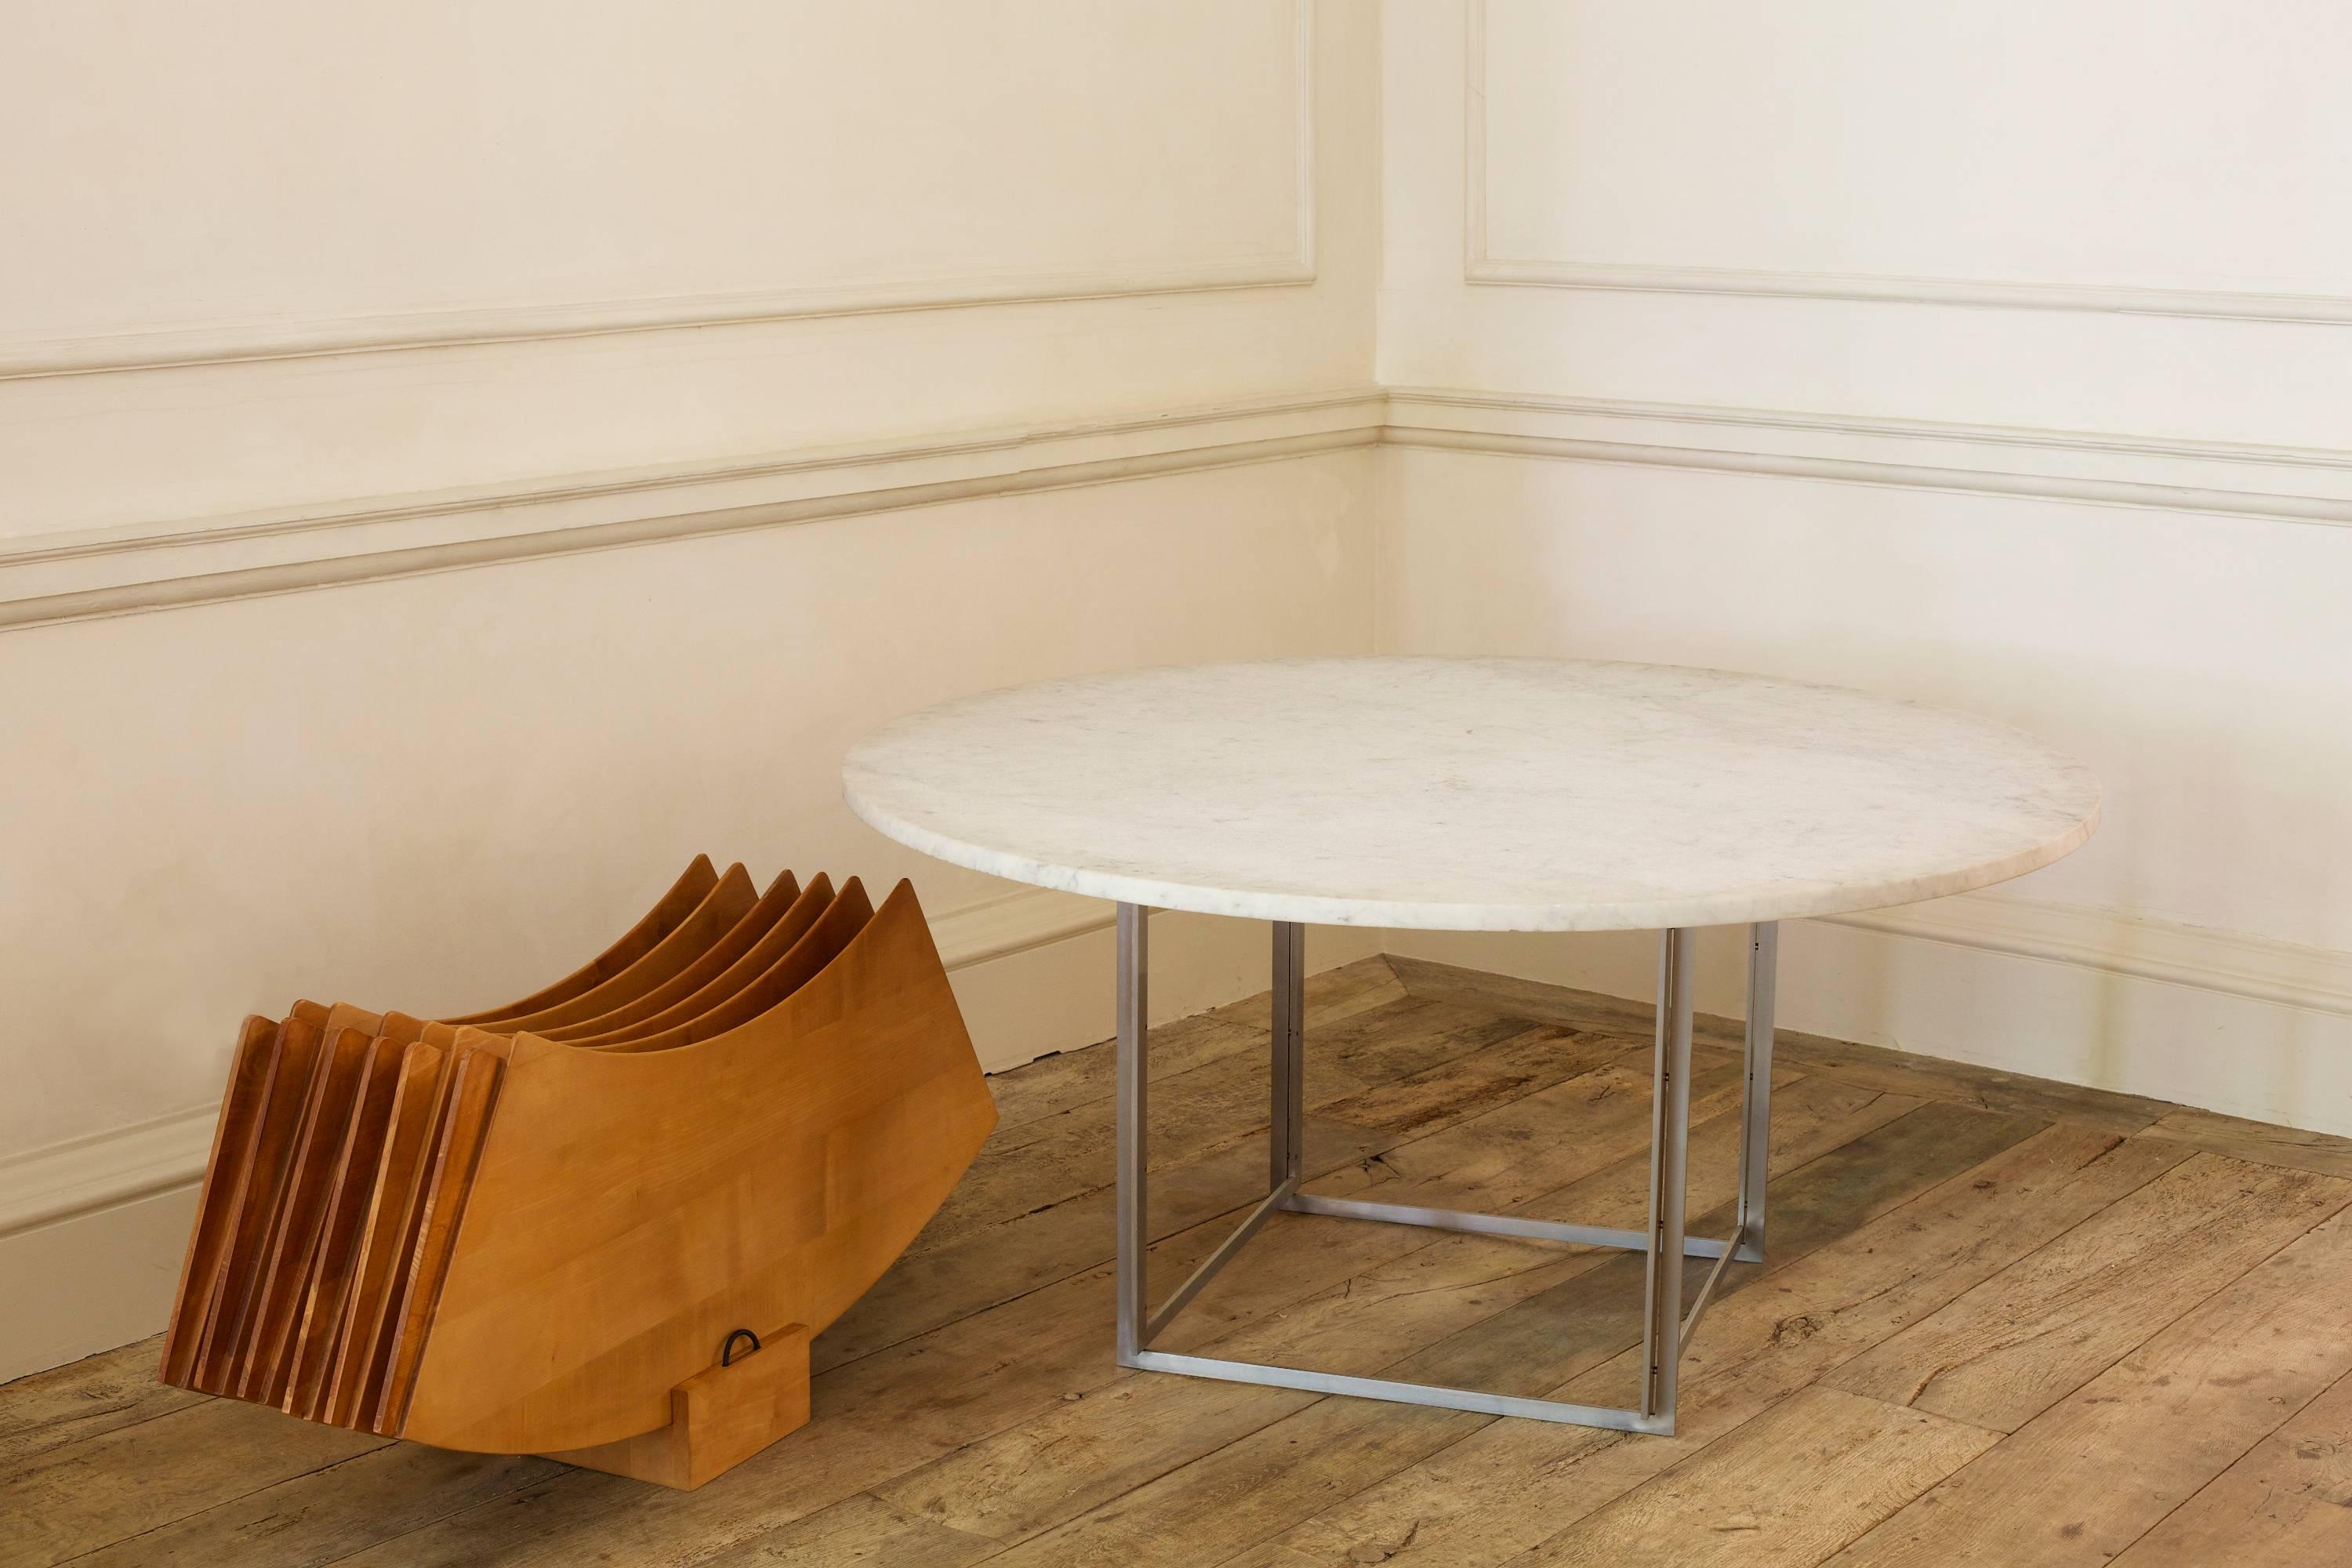 Designed by Poul Kjaerholm for E. Kold Chrstensen

White marble and matte nickel-plated steel with extra leaves in birch, with storage rack, that extends the diameter by 72cm

One of the defining features of the table is the birch extension